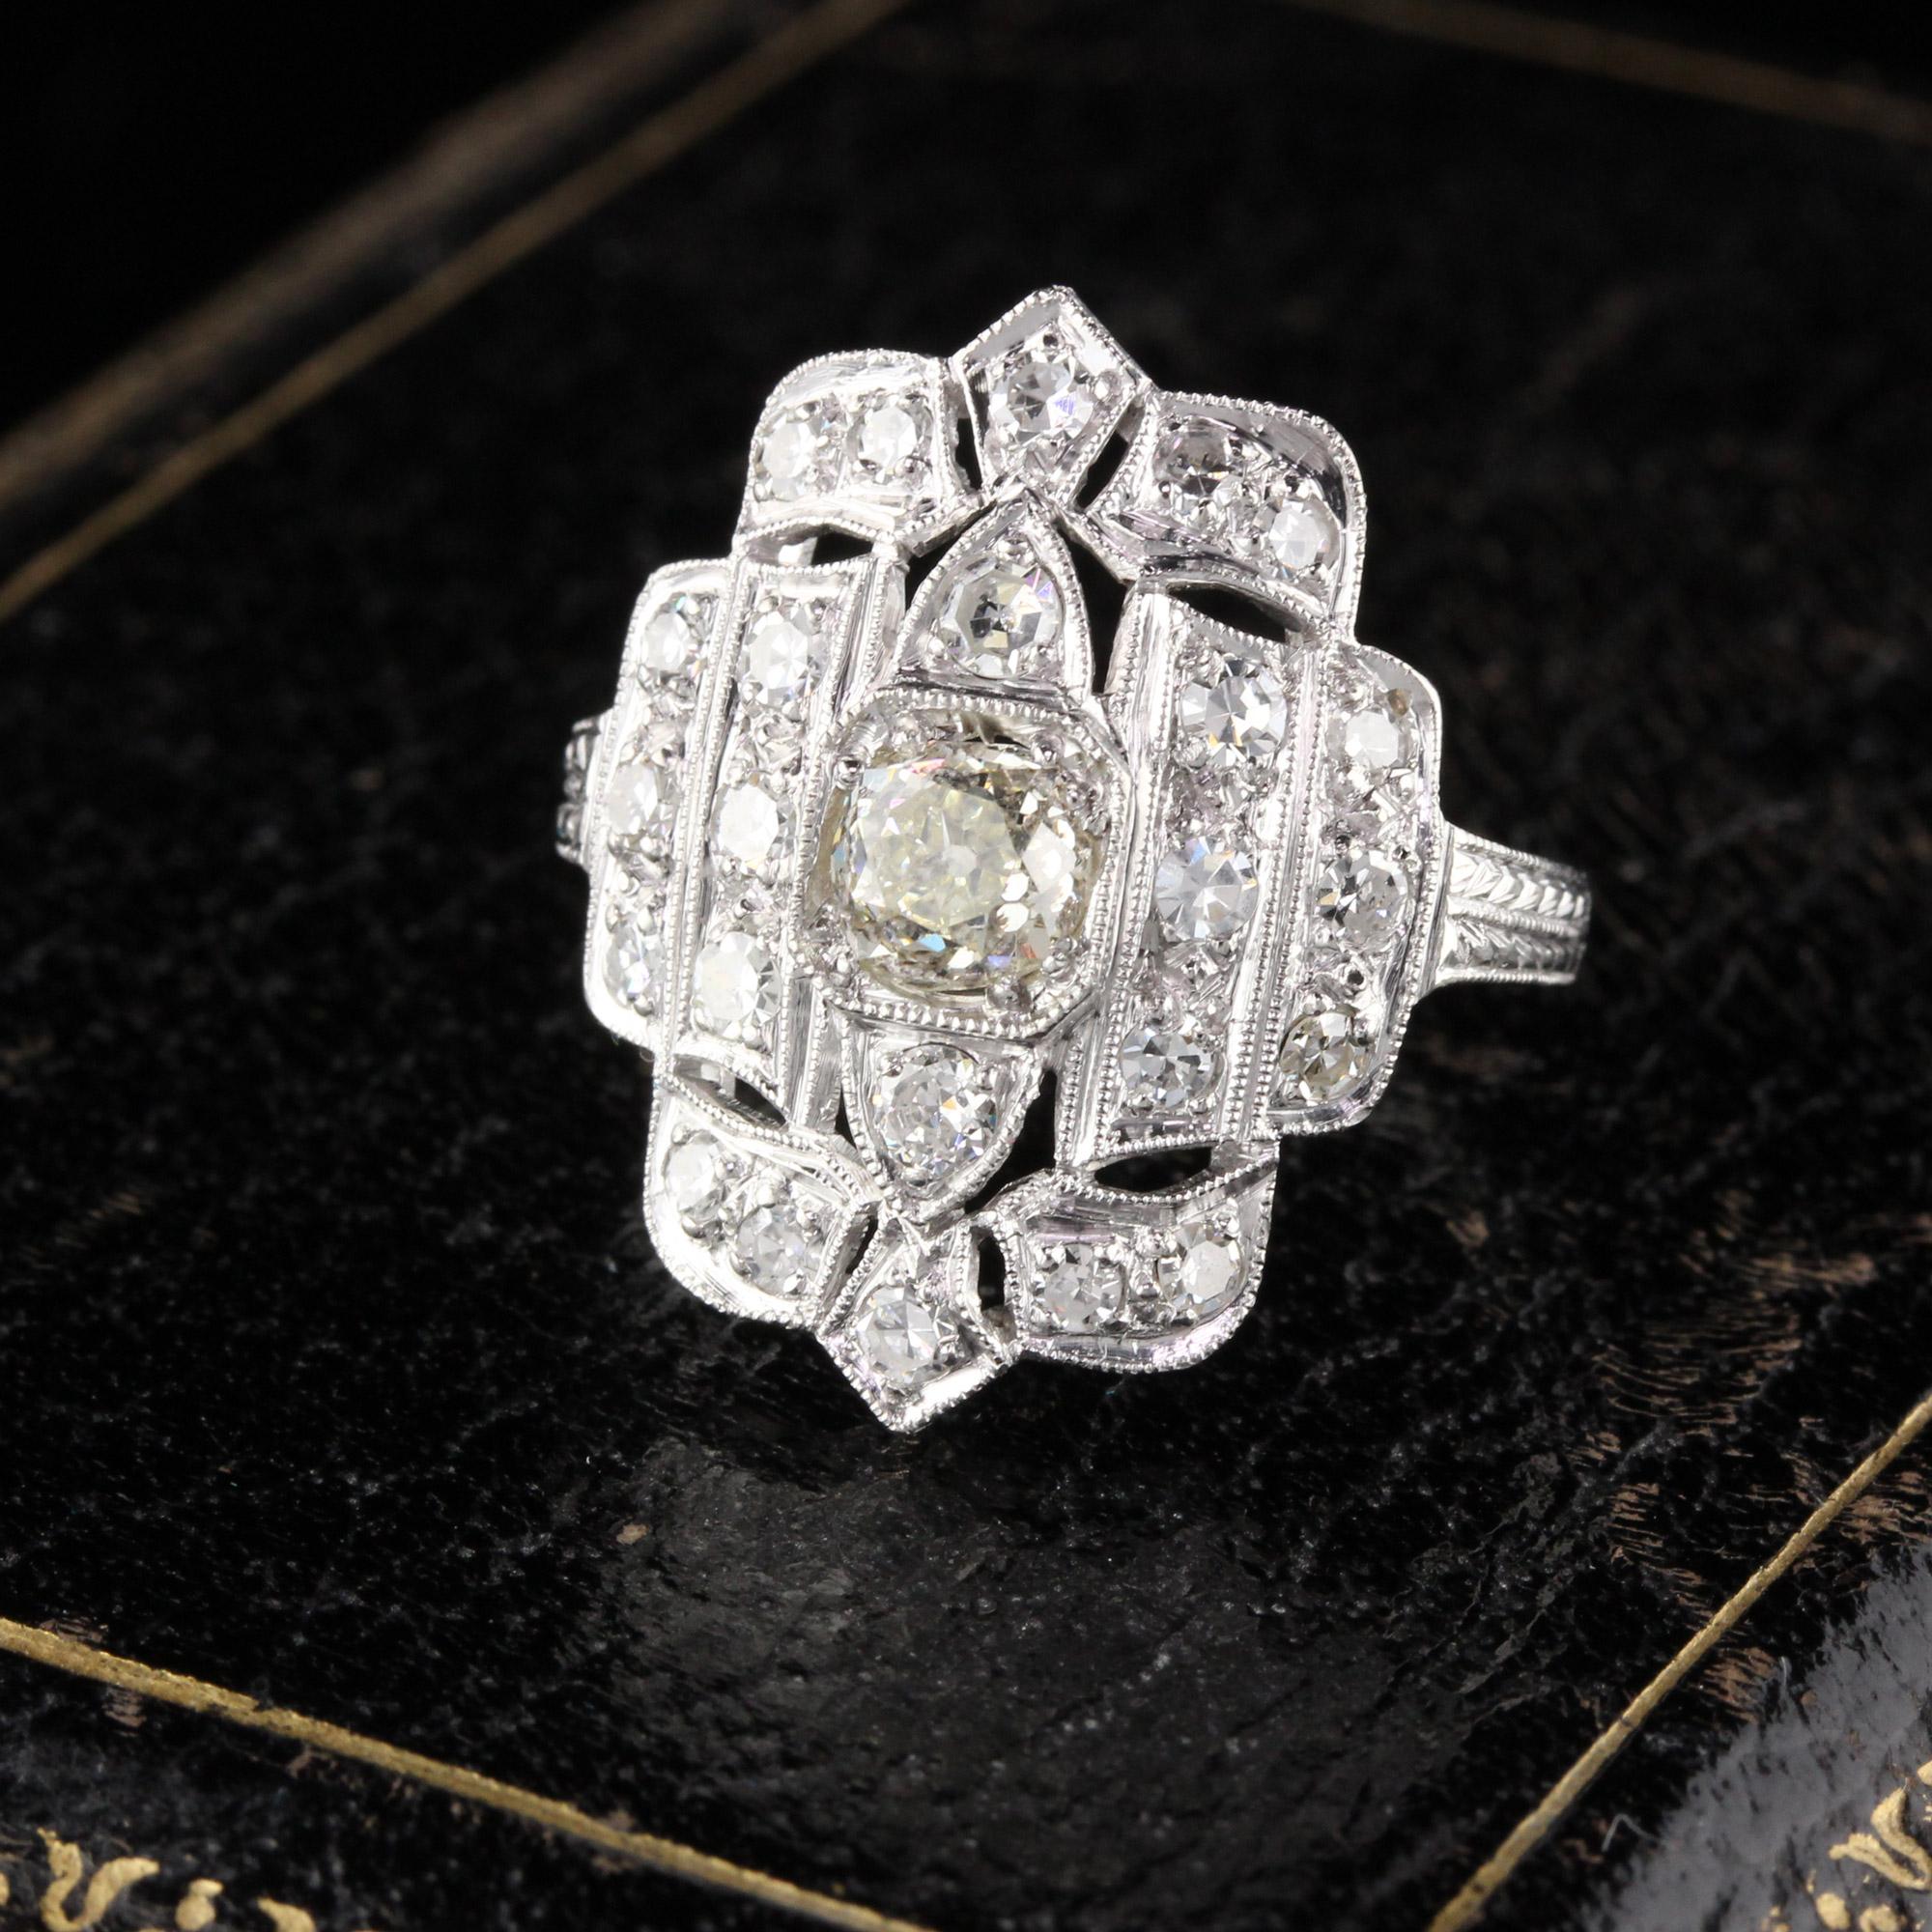 Magnificent Art Deco Shield Ring in Platinum with Old cut diamonds. Excellent condition!

#R0173

Metal: Platinum

Weight: 6 Grams

Center Diamond Weight: 0.72 cts Old Mine Cut

Center Diamond Color: Y-Z (Very Light Yellow)

Center Diamond Clarity: